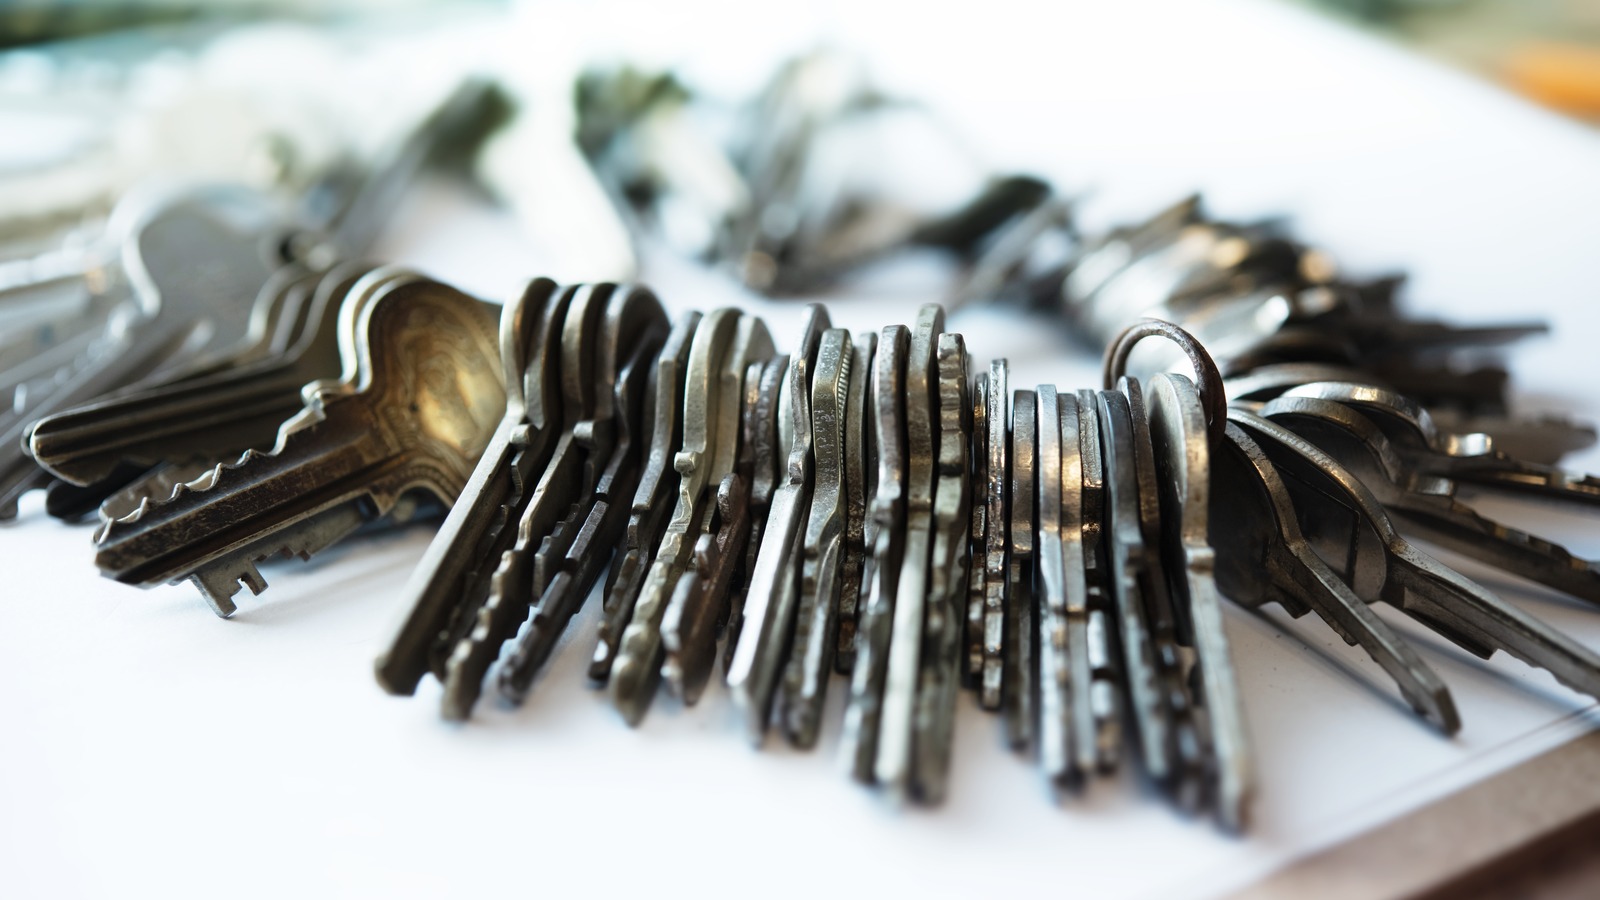 15 Unconventional DIY Projects Made With Old Keys